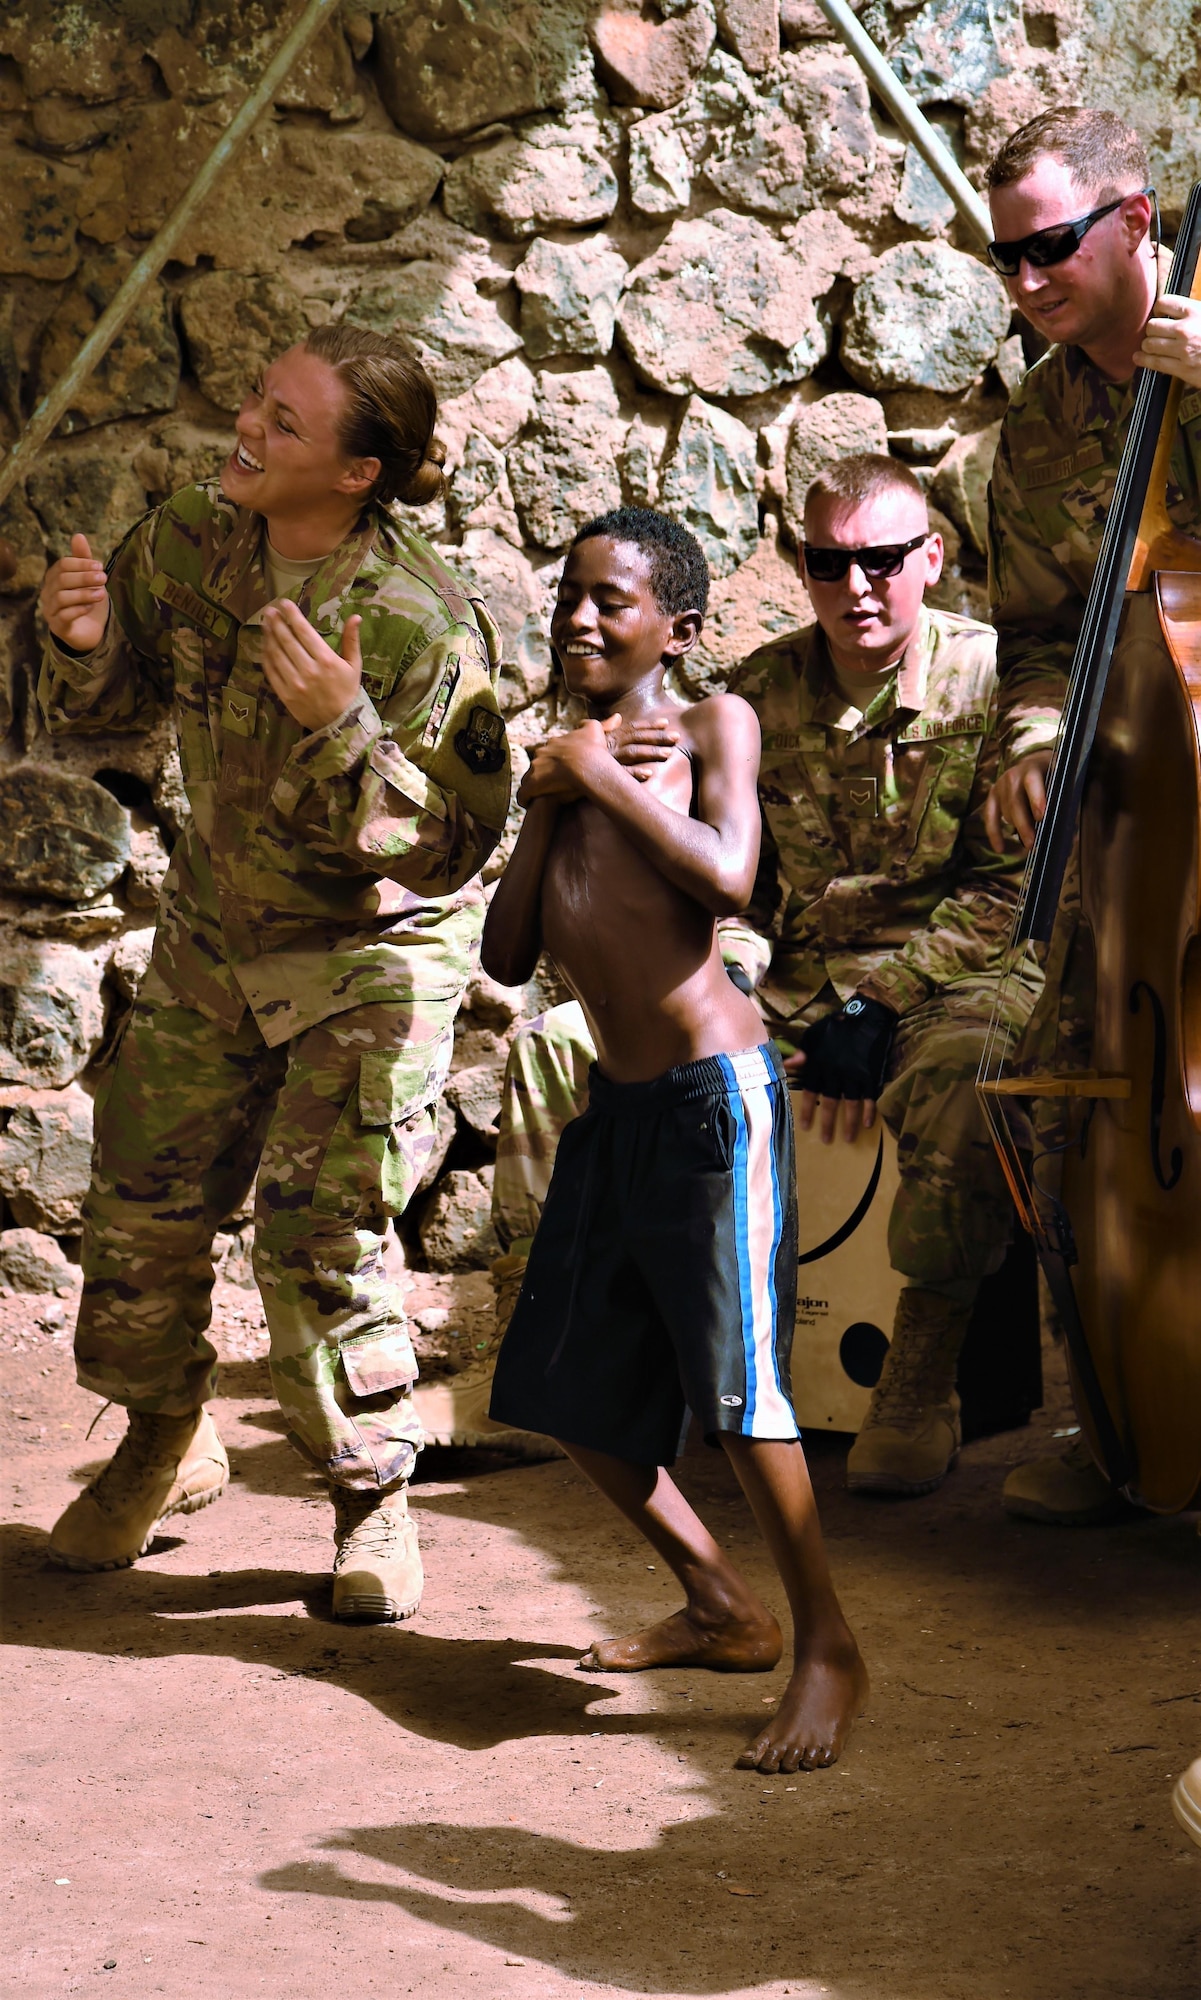 Airman 1st Class Anneke Bentley, U.S. Air Forces Central Command Band vocalist, sings and dances with a child from Caritas Djibouti while Airman 1st Class Joshua Dick, AFCENT Band percussionist, and Tech. Sgt. Joshua Holdridge, AFCENT Band bass player, accompany her in Djibouti City, June 6, 2017. The AFCENT Band, Starlifter, is based in Al Udeid Air Base, Qatar, and has a mission of performing and touring in small ensembles to positively promote troop morale, diplomacy and outreach to host nation communities. (U.S. Air National Guard photo by Tech. Sgt. Andria Allmond)